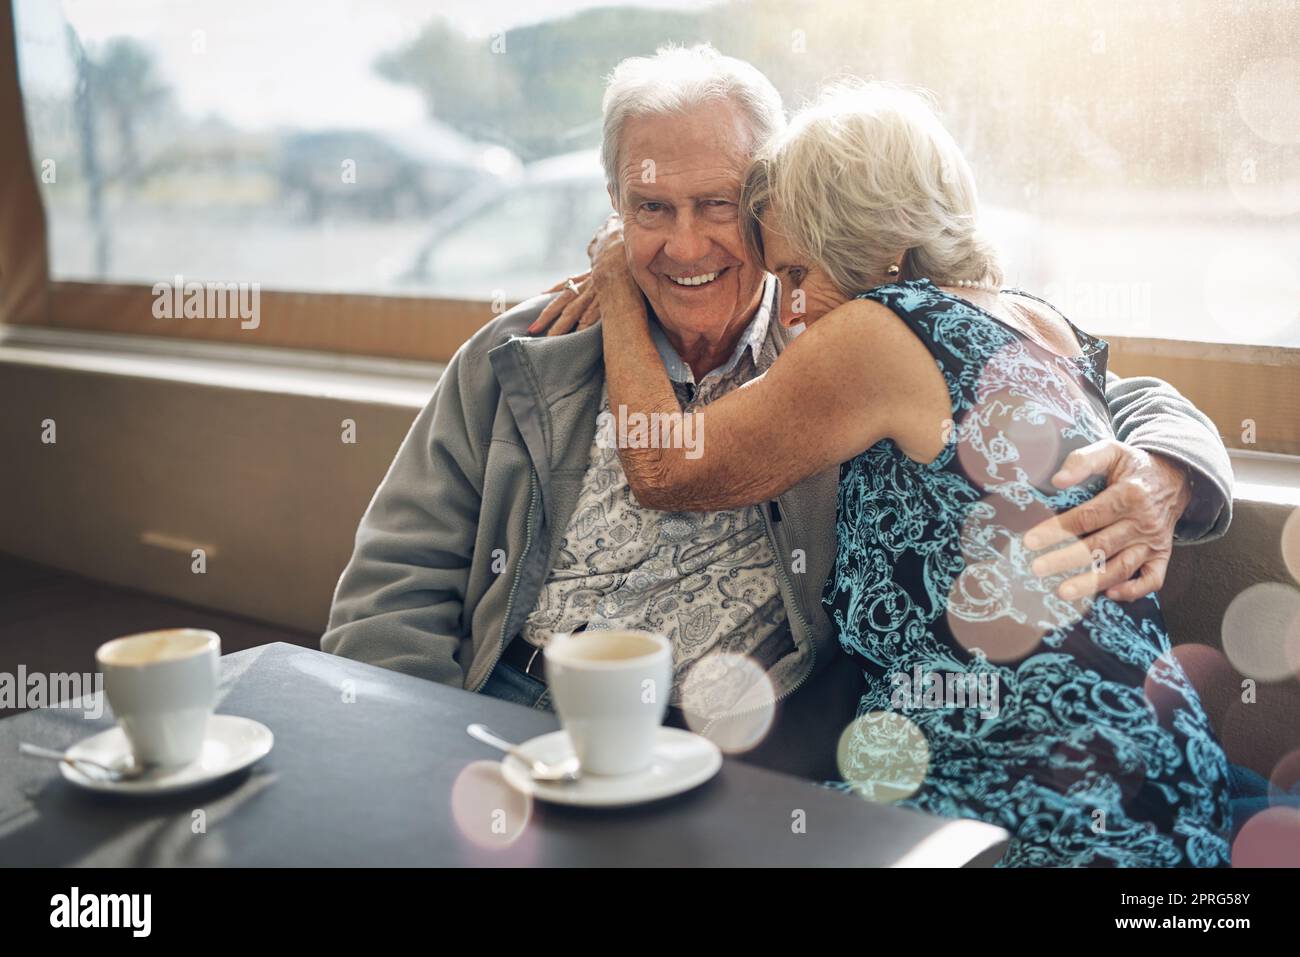 Keeping the romance alive with a good old coffee date. a mature couple spending the day together. Stock Photo